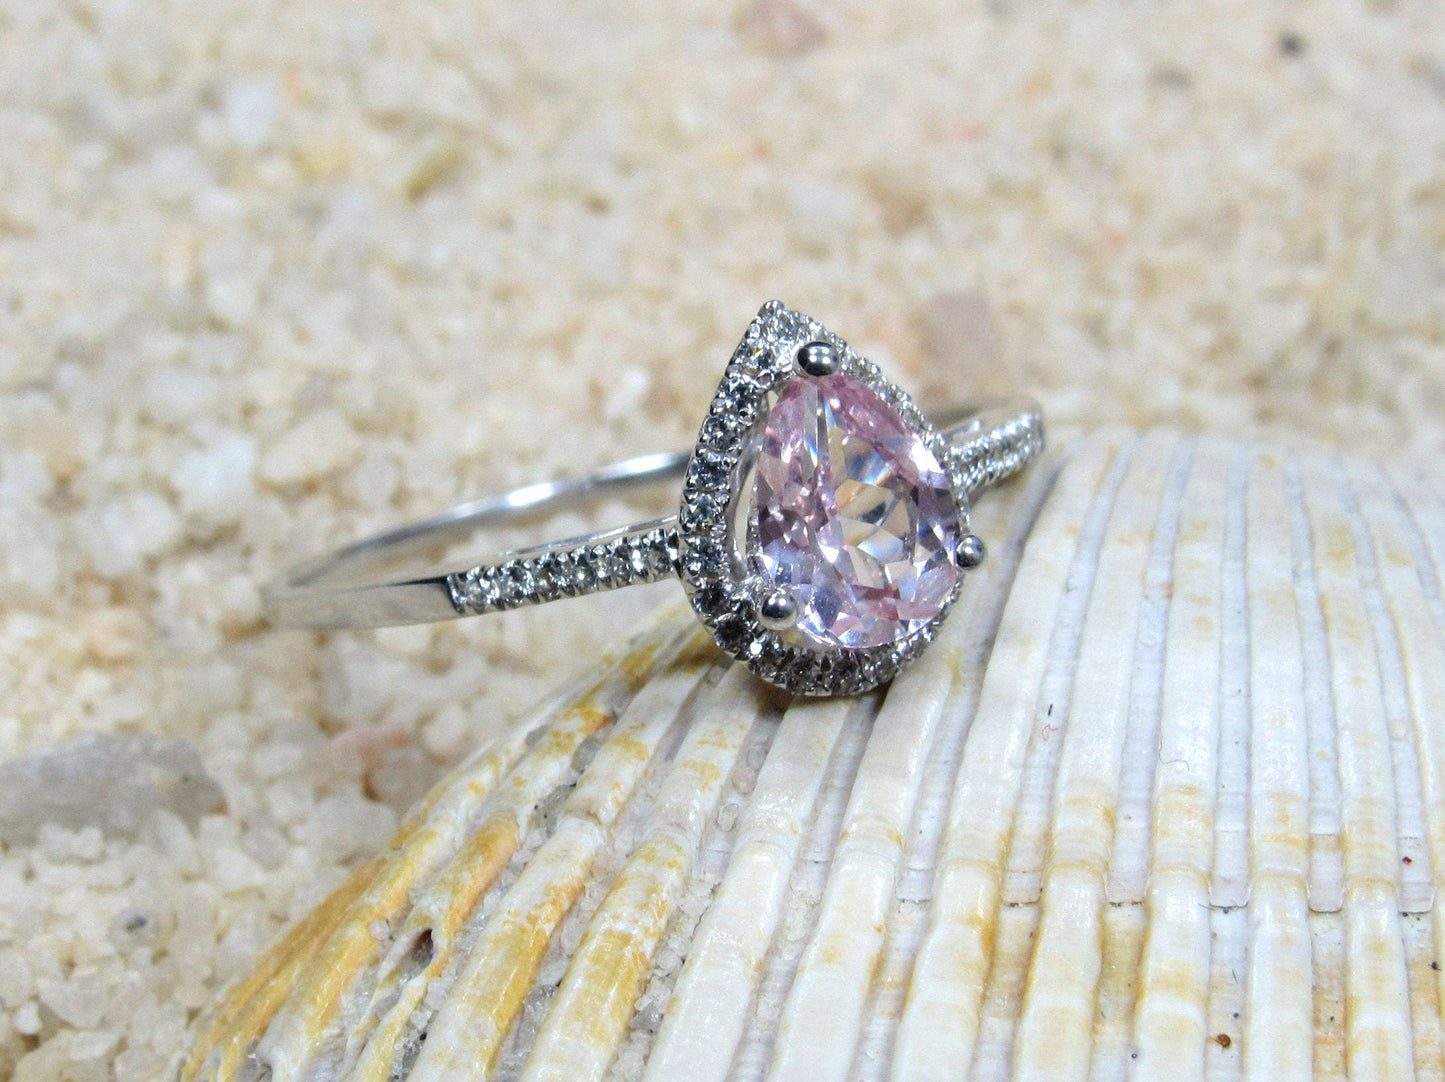 Peach Sapphire Engagement Ring, Diamonds Pear Halo, Goccia, 1ct, 7x5mm, Cathedral,Gift For Her,White-Yellow-Rose Gold-10k-14k-18k-Platinum BellaMoreDesign.com